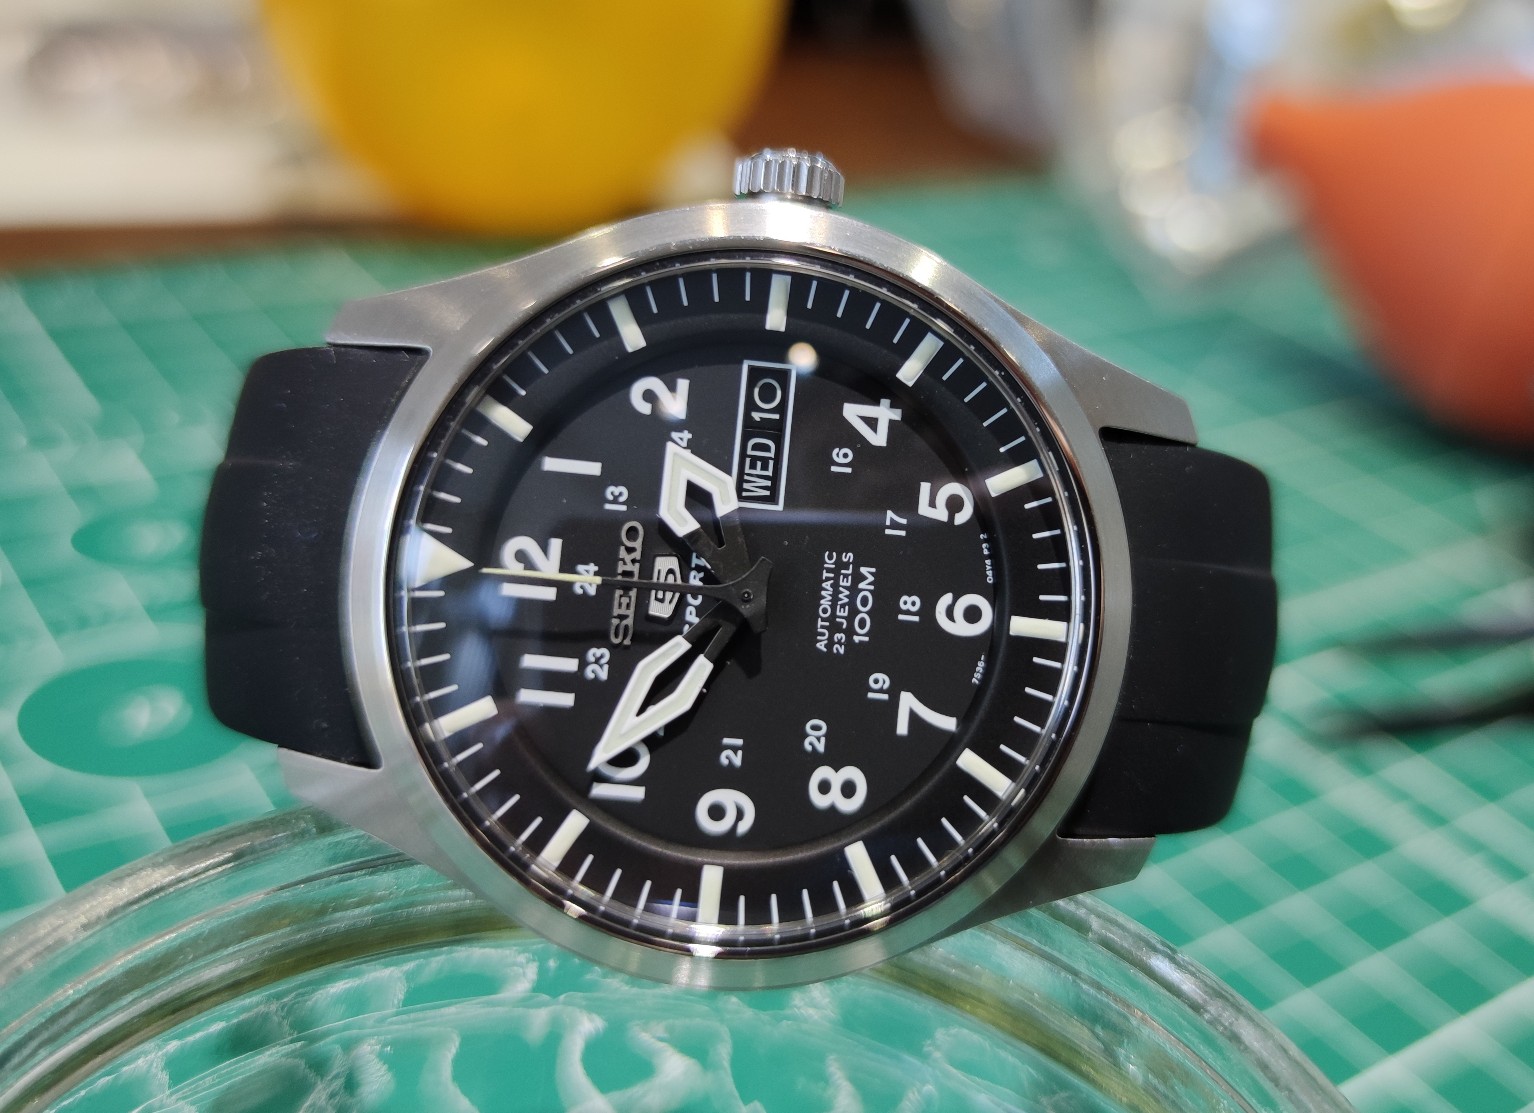 Let's see your Seikos! - Page 181 - Watches - PistonHeads UK